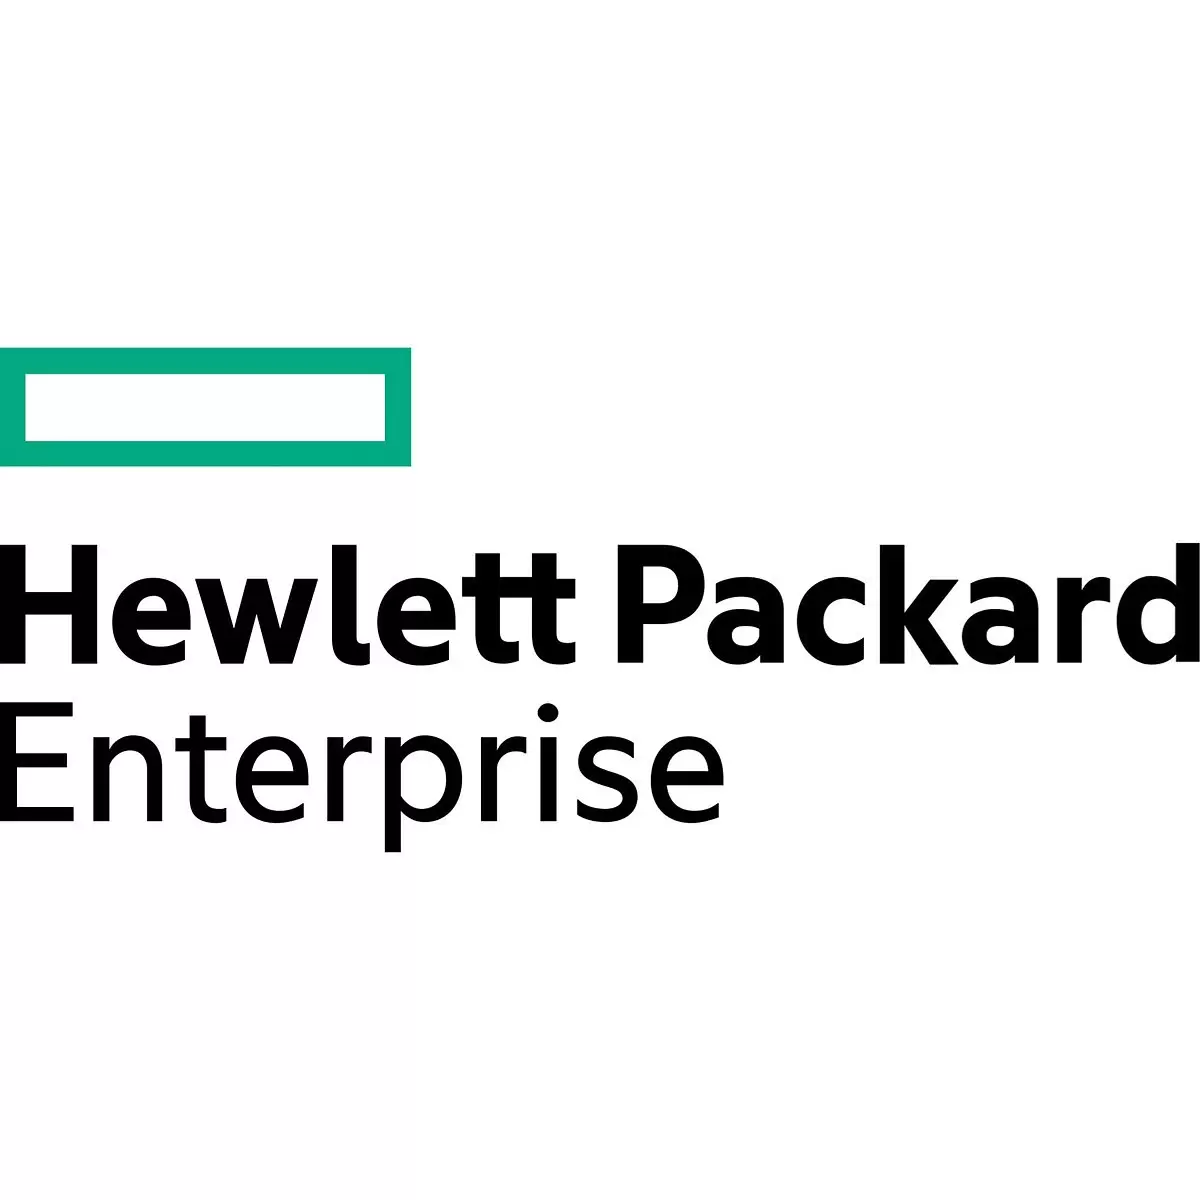 HPE 3Y FC NBD Exch MSR2003 Router SVC